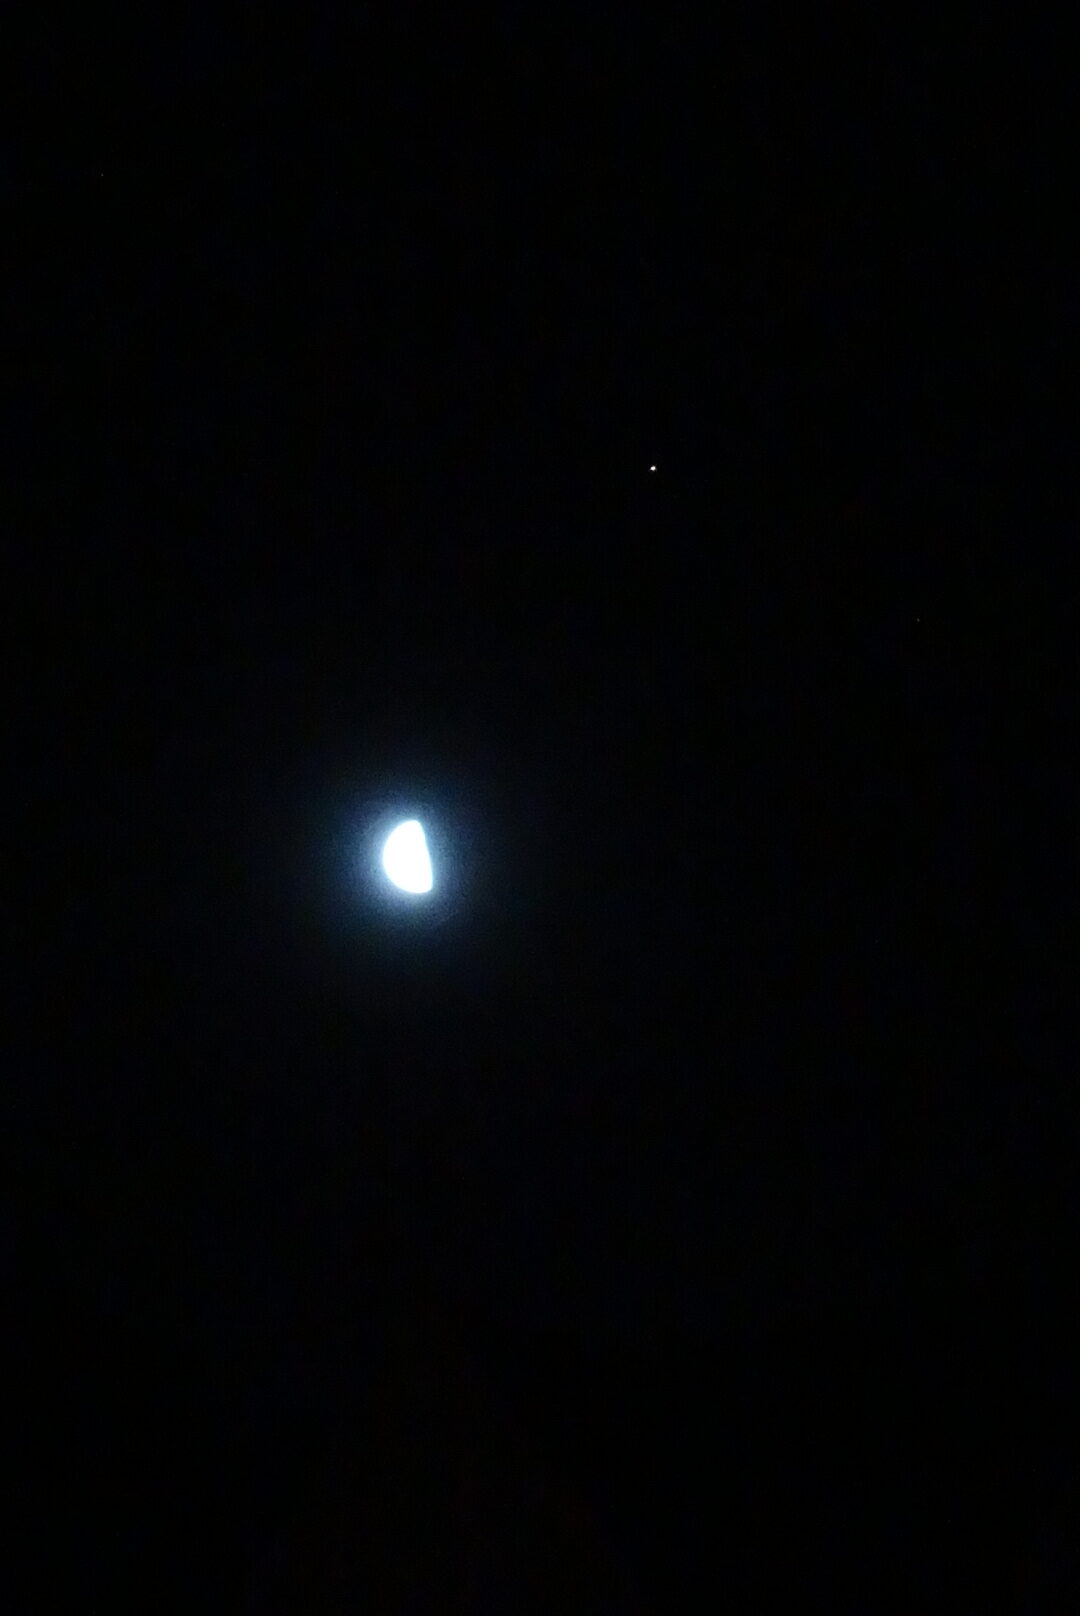 The Moon and Mars